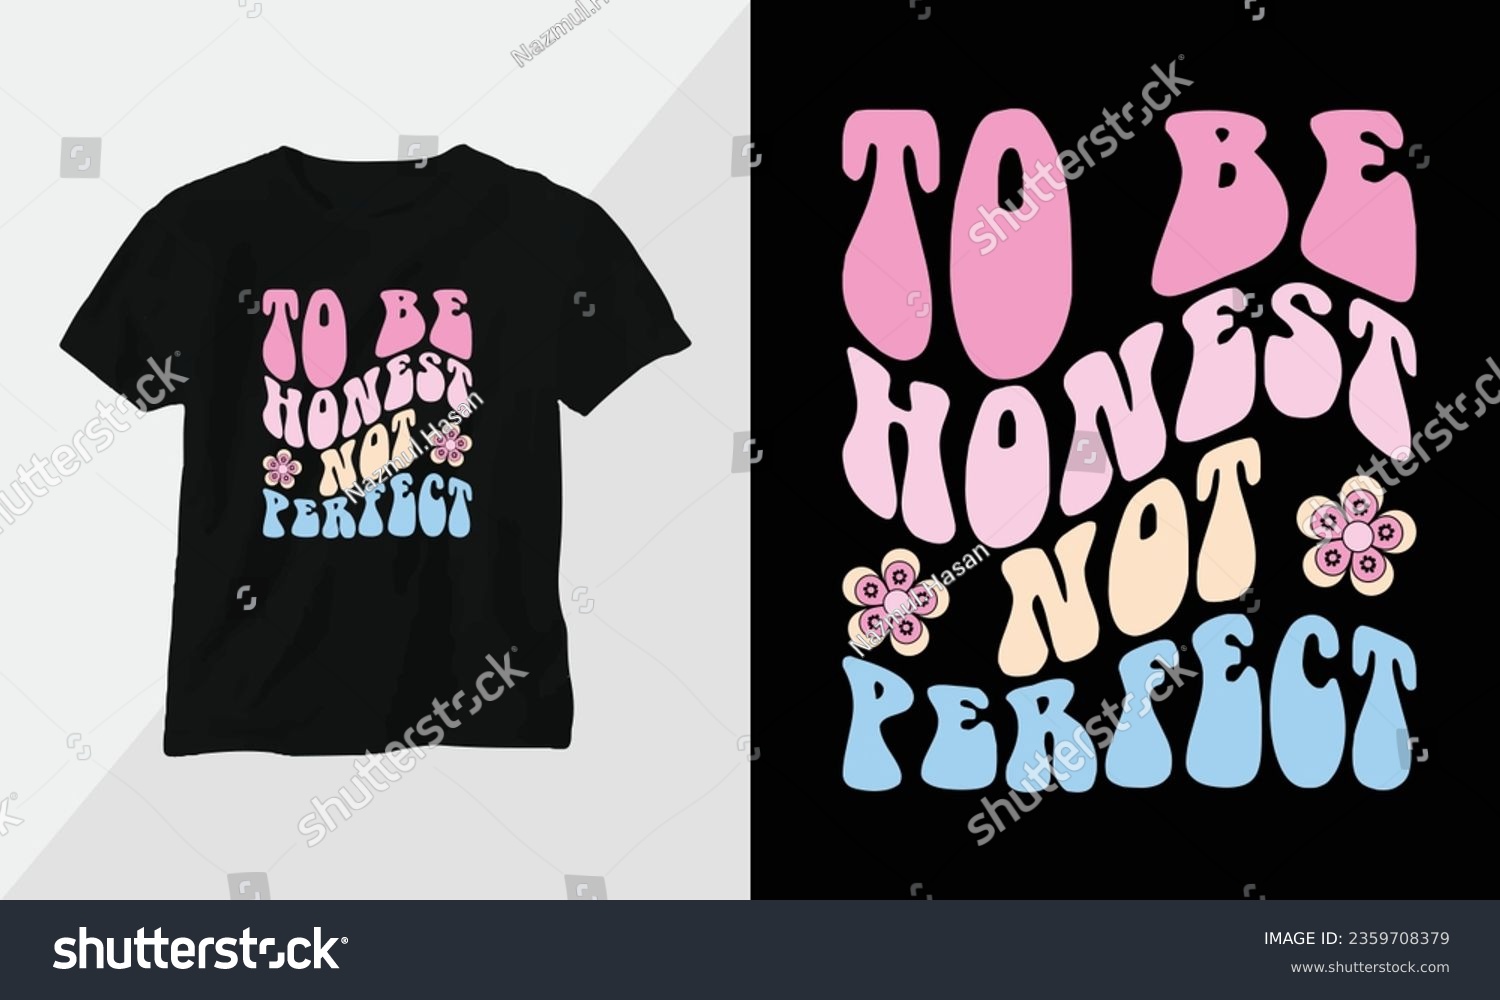 SVG of To be honest, not perfect - Retro Groovy Inspirational T-shirt Design with retro style svg